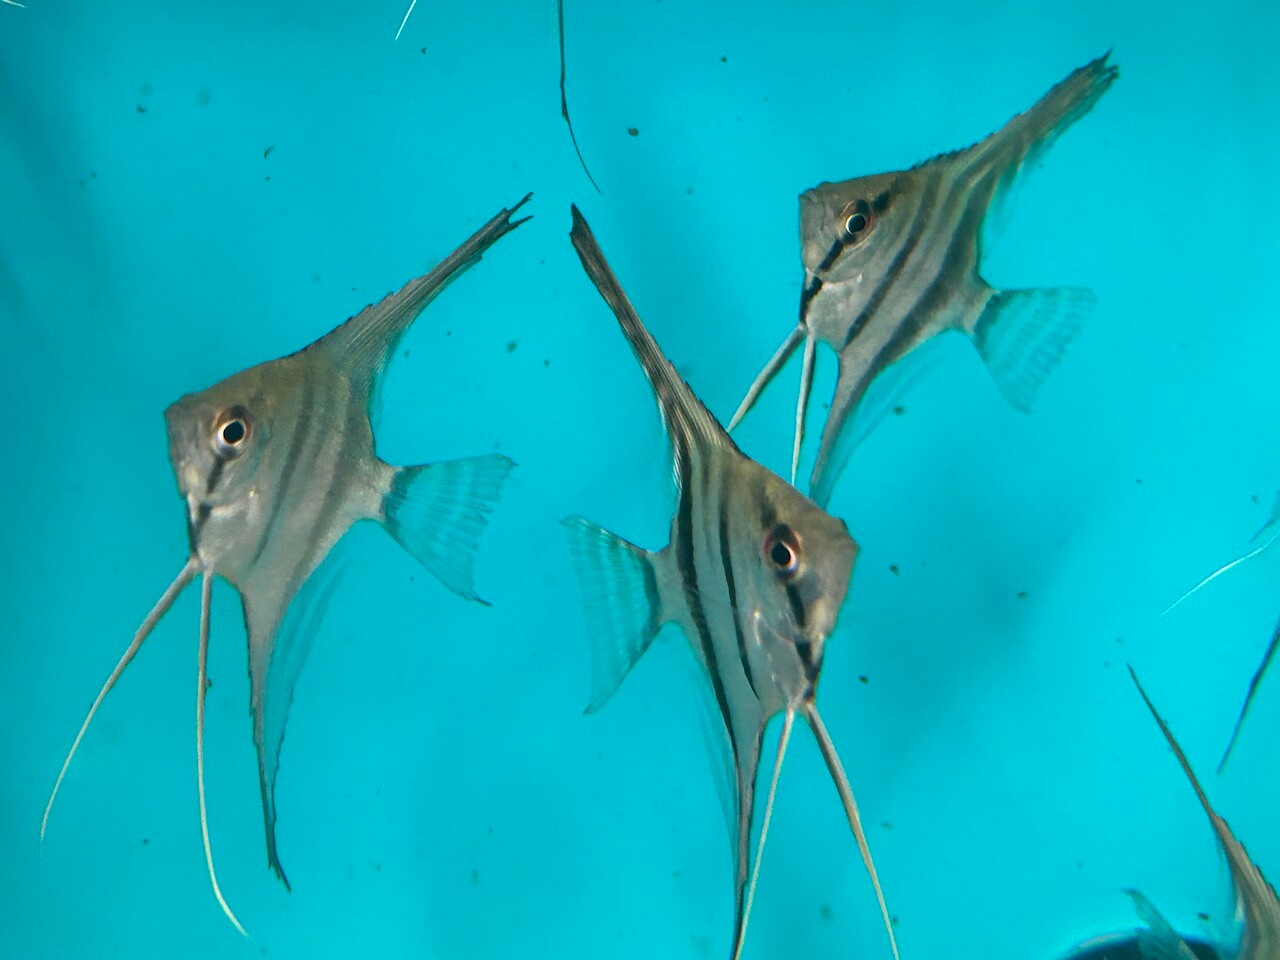 Wild silver angelfish for sale - Exotic Fish Shop - 774-400-4598